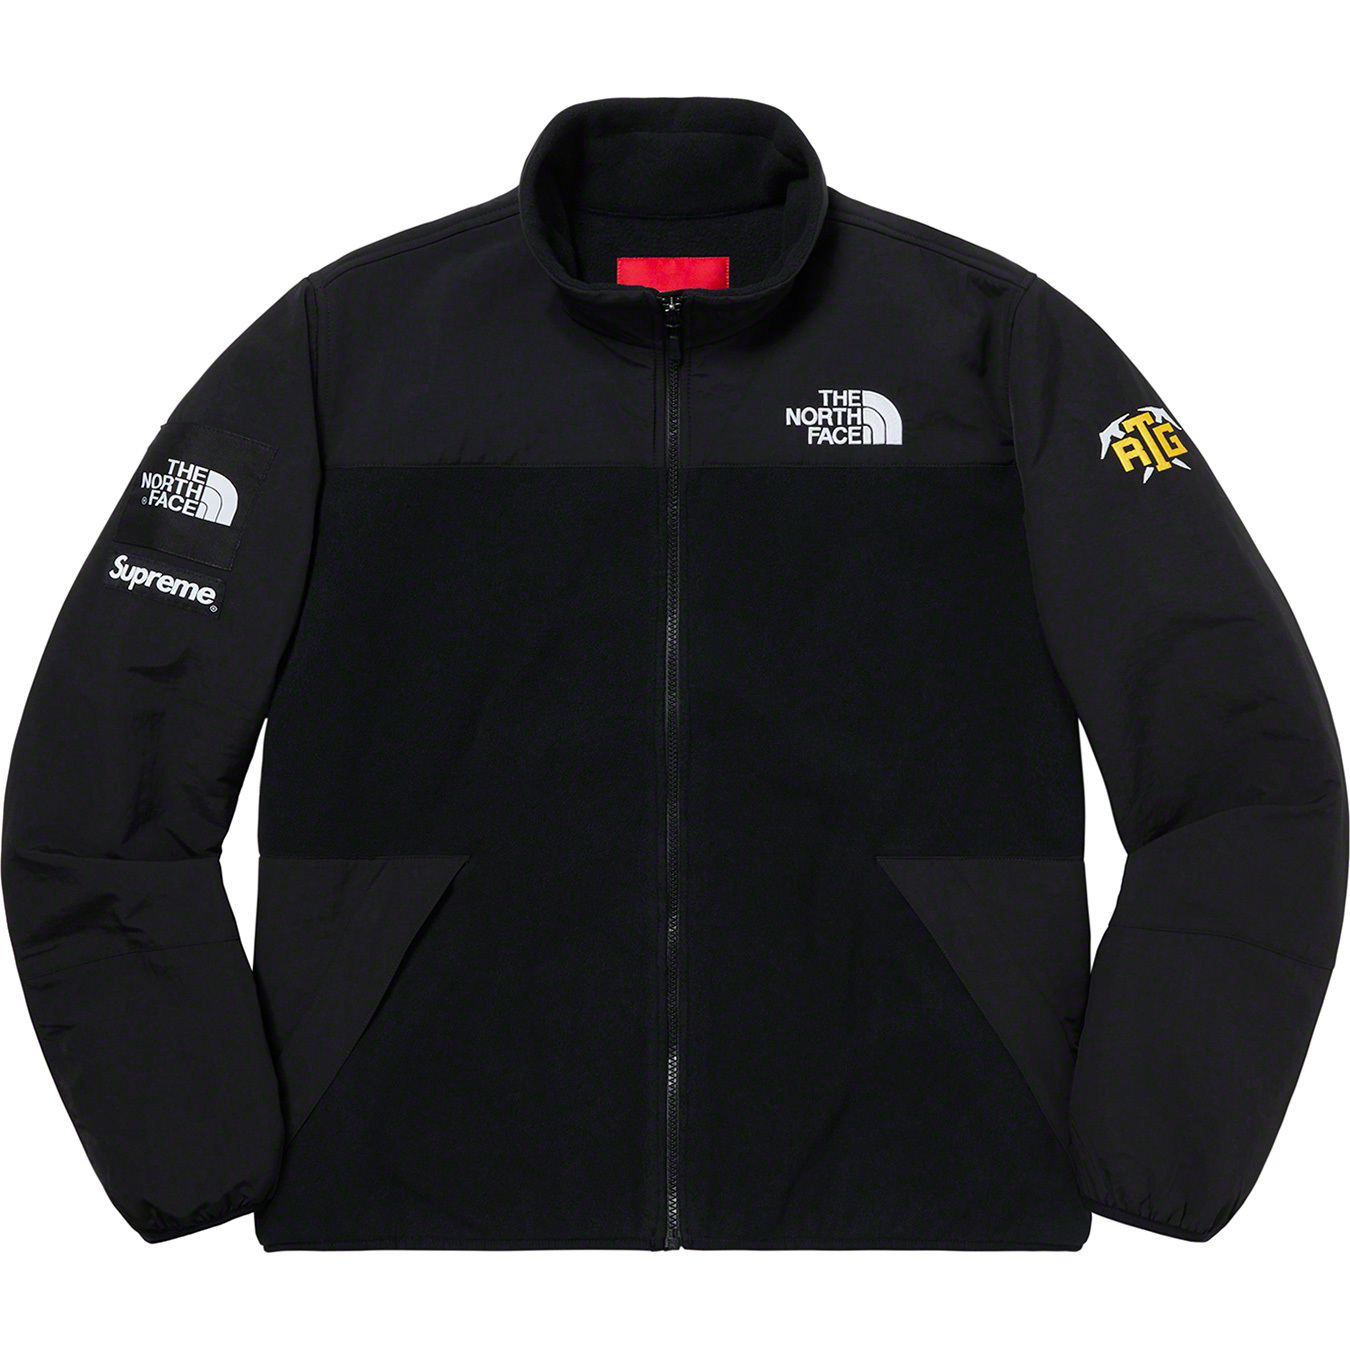 The North Face RTG Fleece Jacket Small-